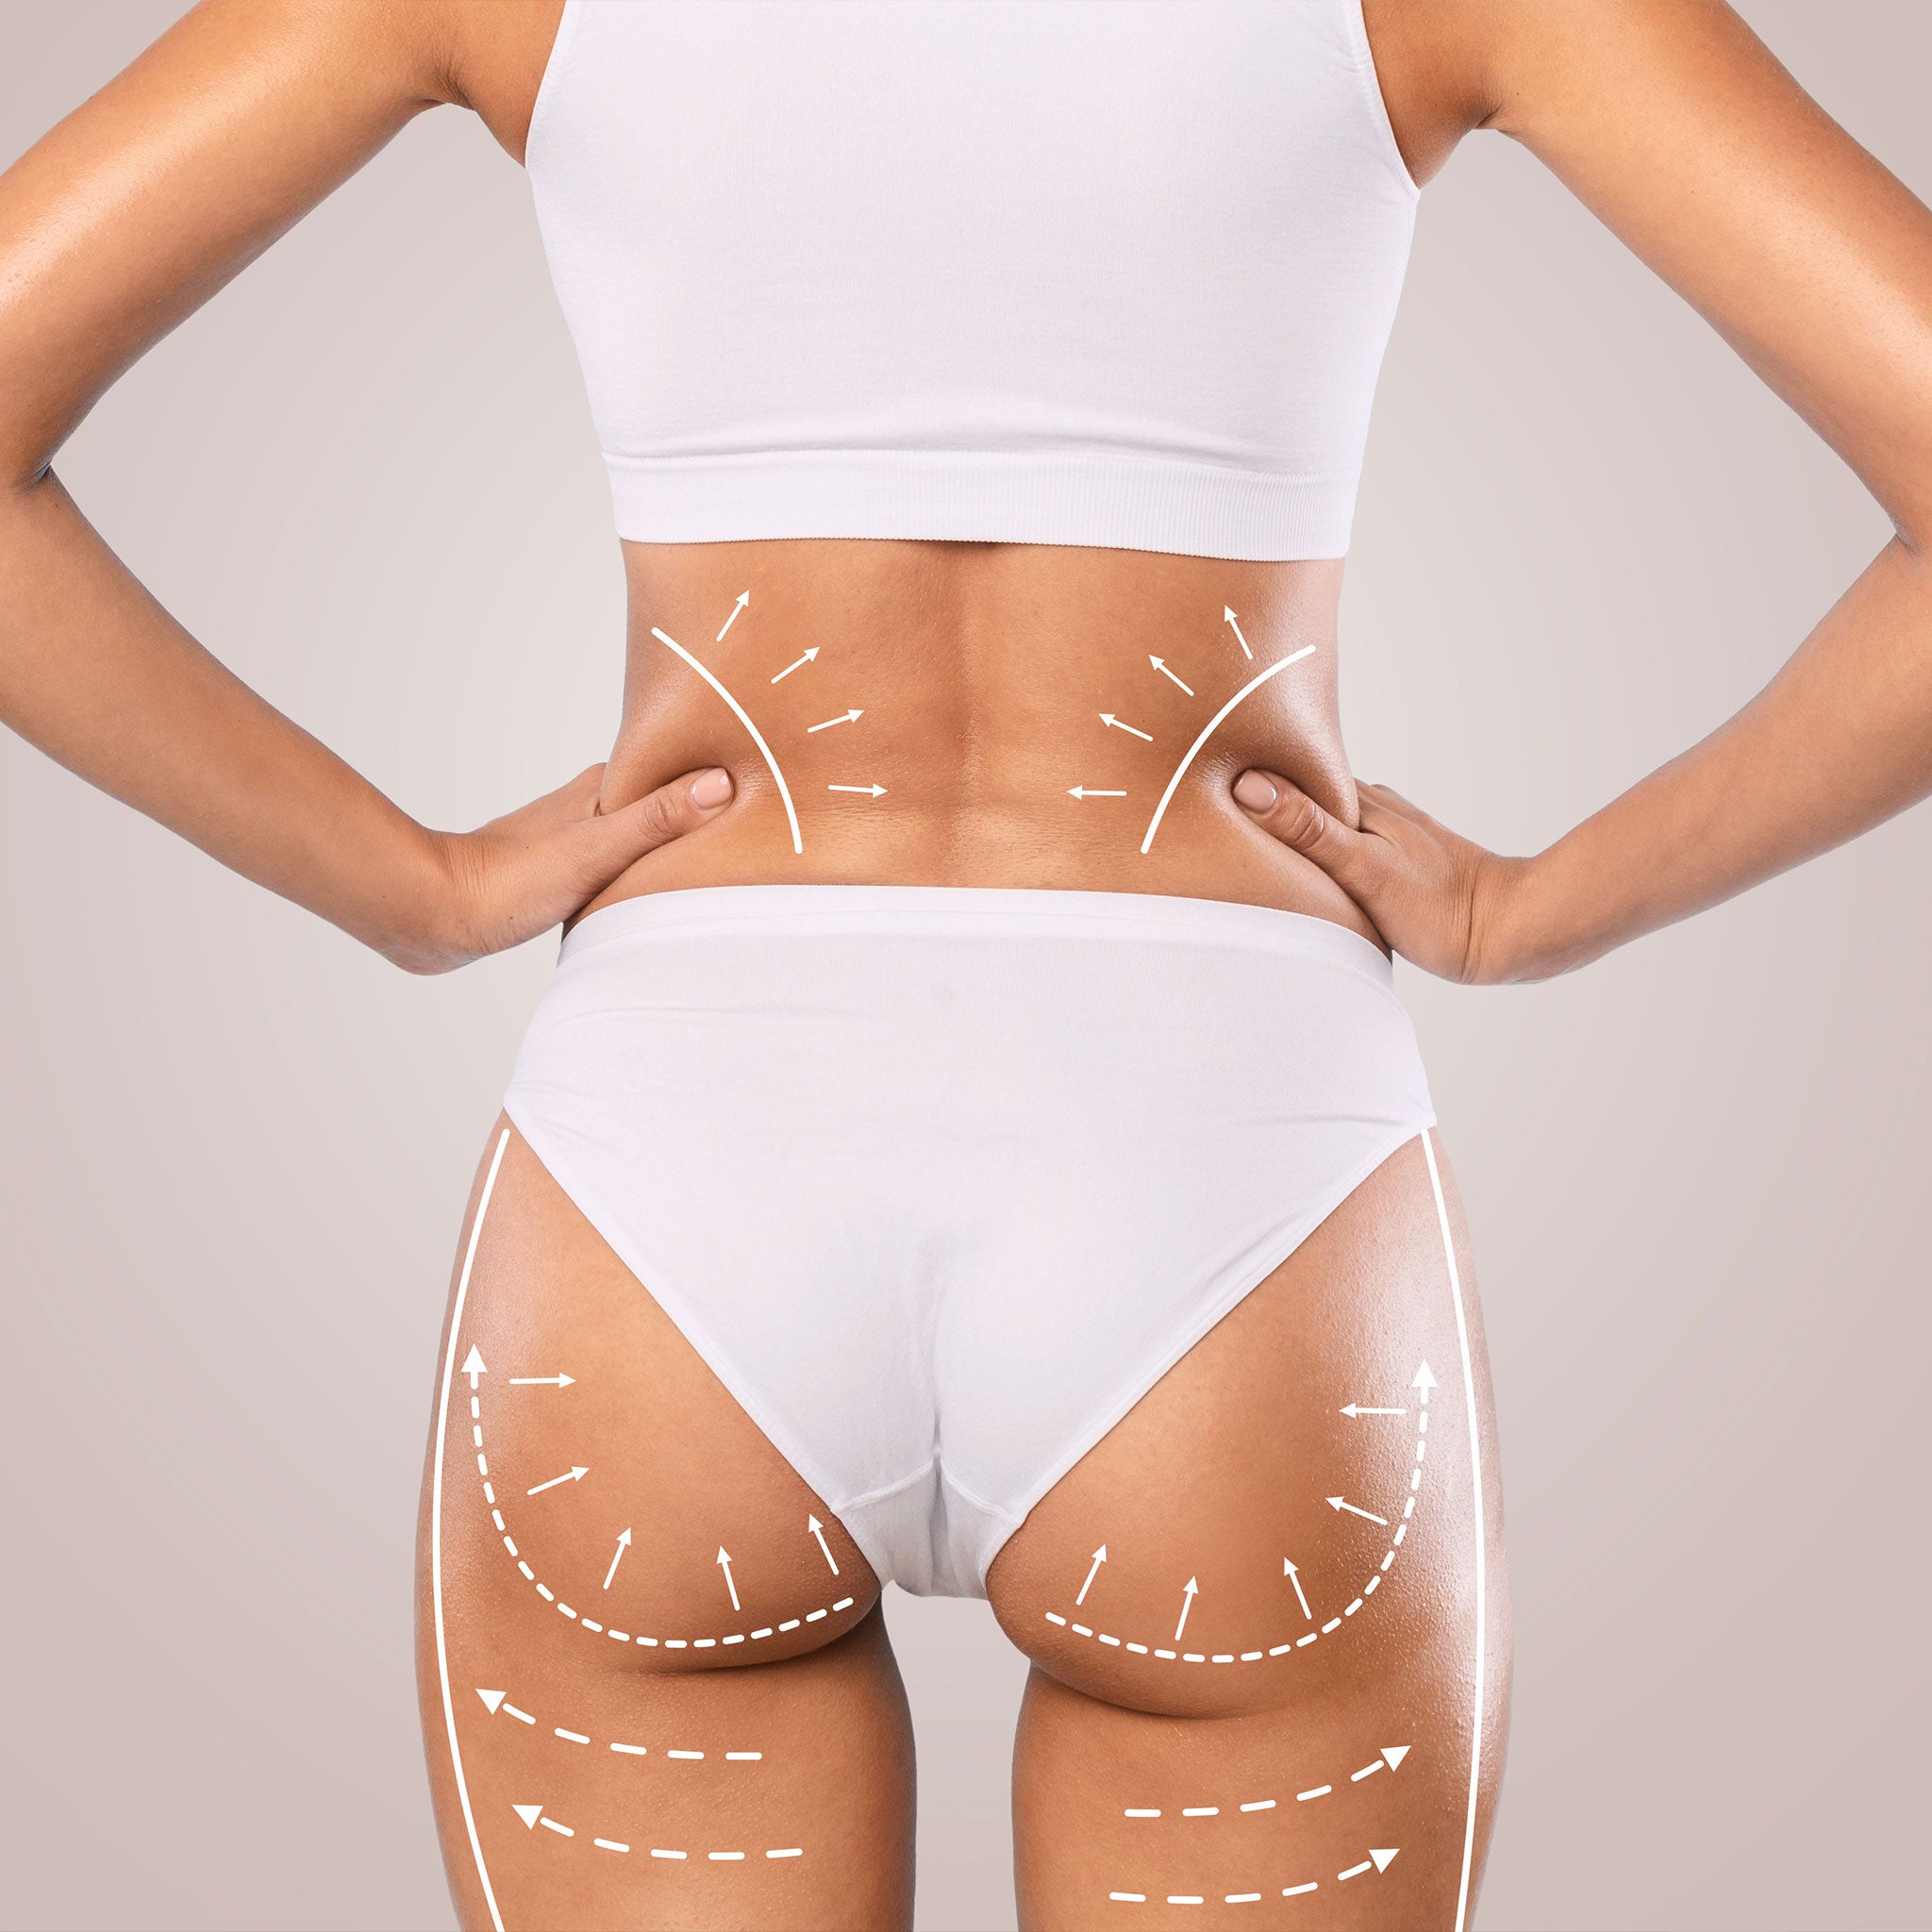 Evaluation for Body Contouring Massages